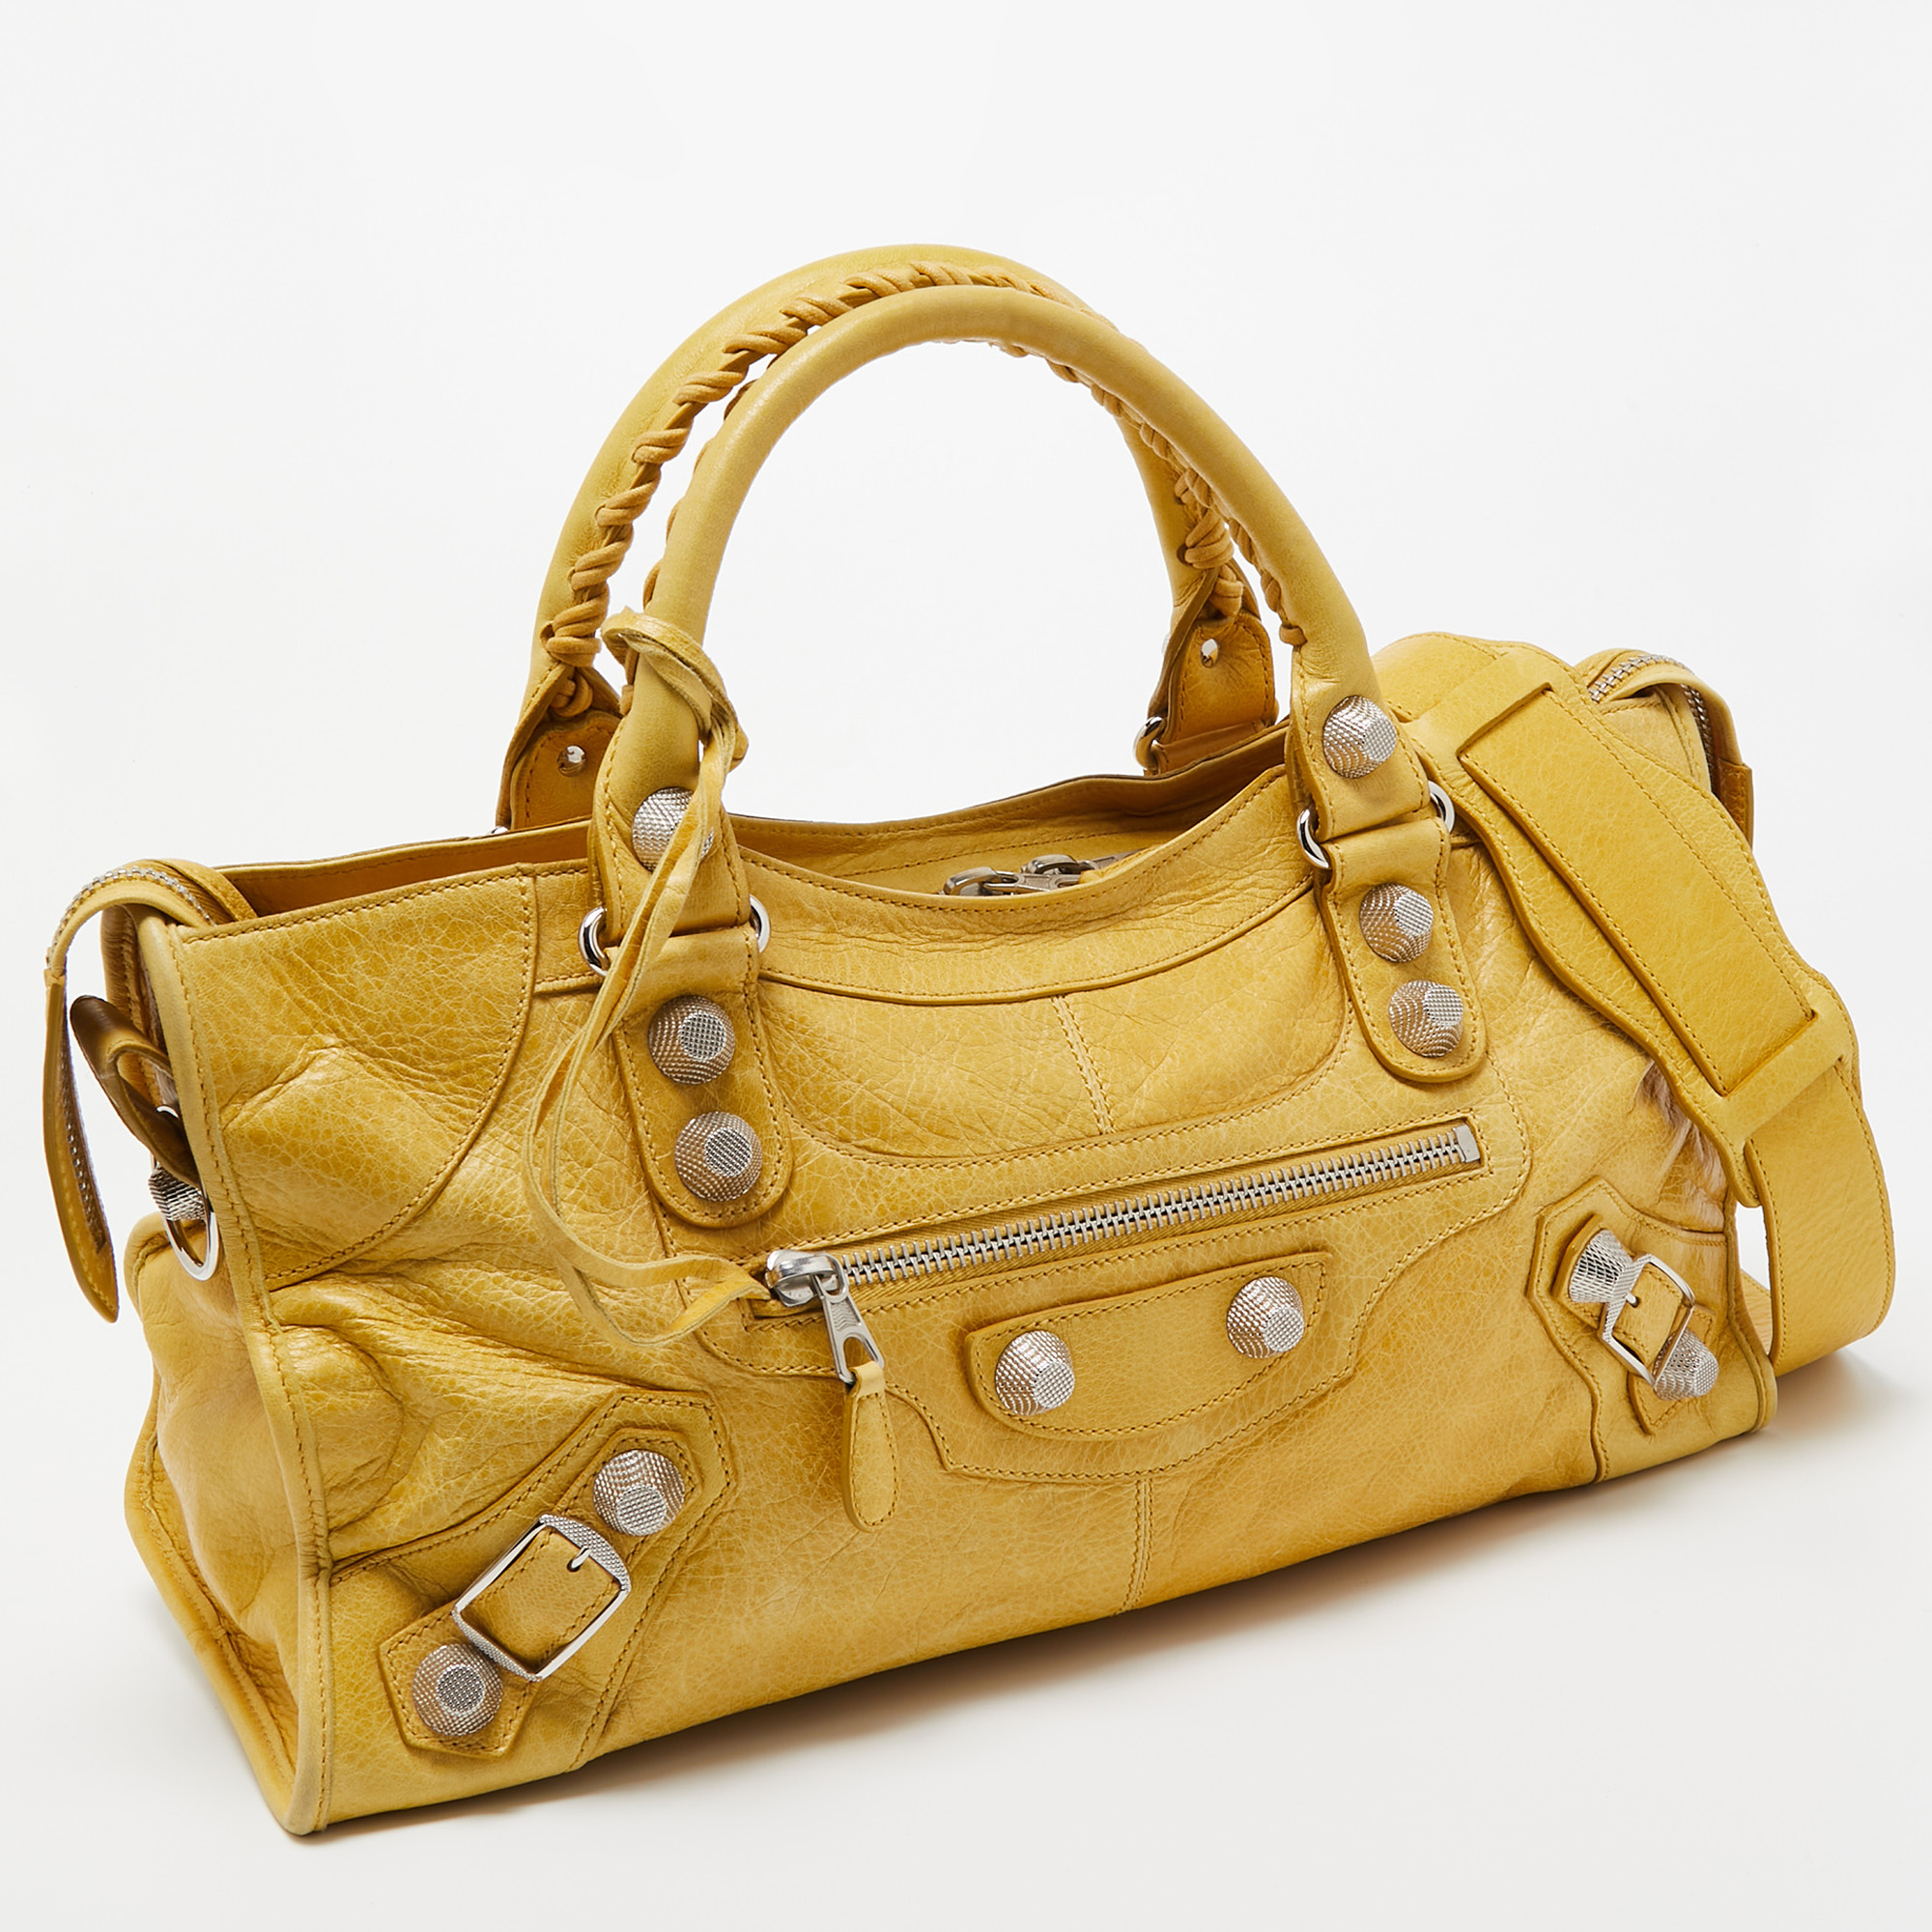 Balenciaga Yellow Leather SGH Part Time Tote